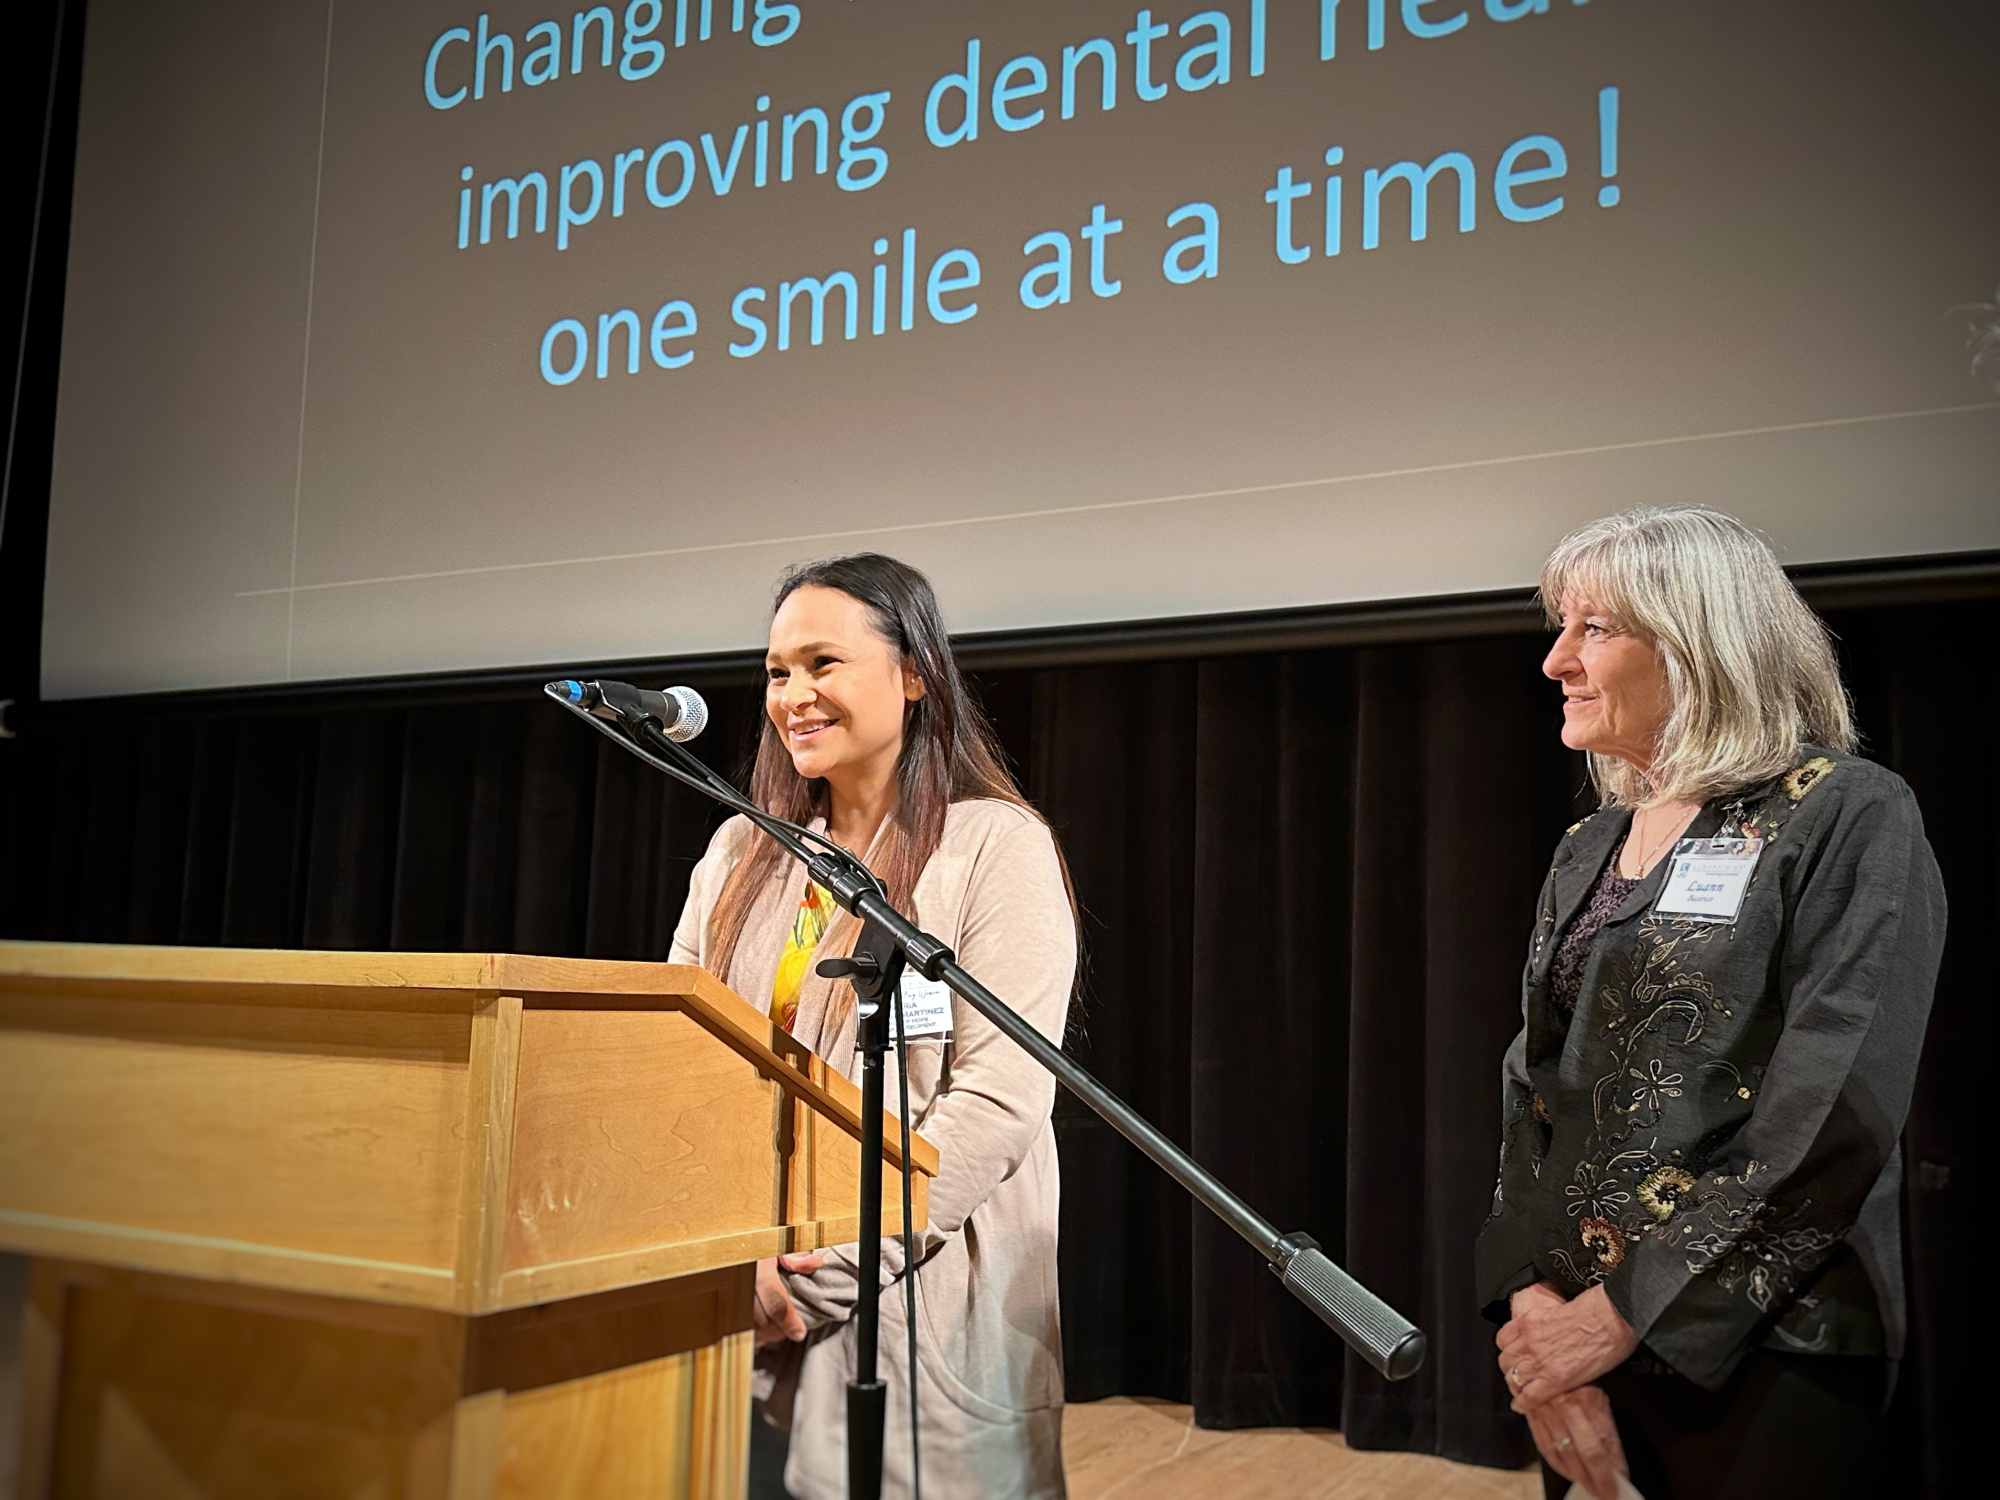 LuAnn Basirico, chair of the Smile of Hope committee with Maria Medina, a recipient of dental care.